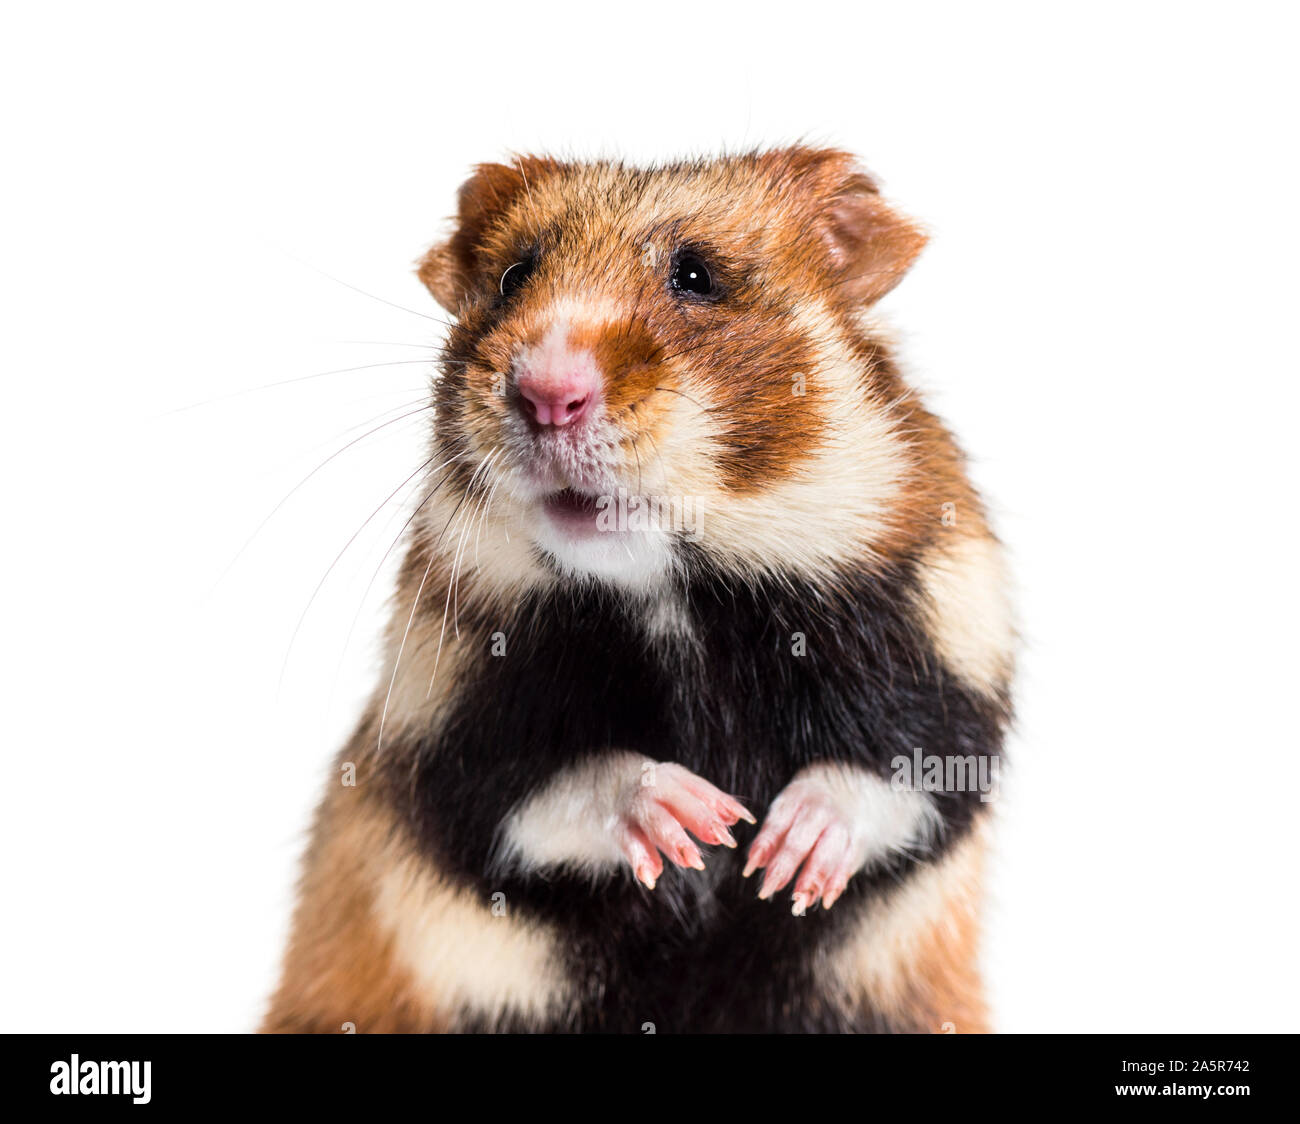 Grand hamster, Cricetus cricetus, in front of white background Banque D'Images